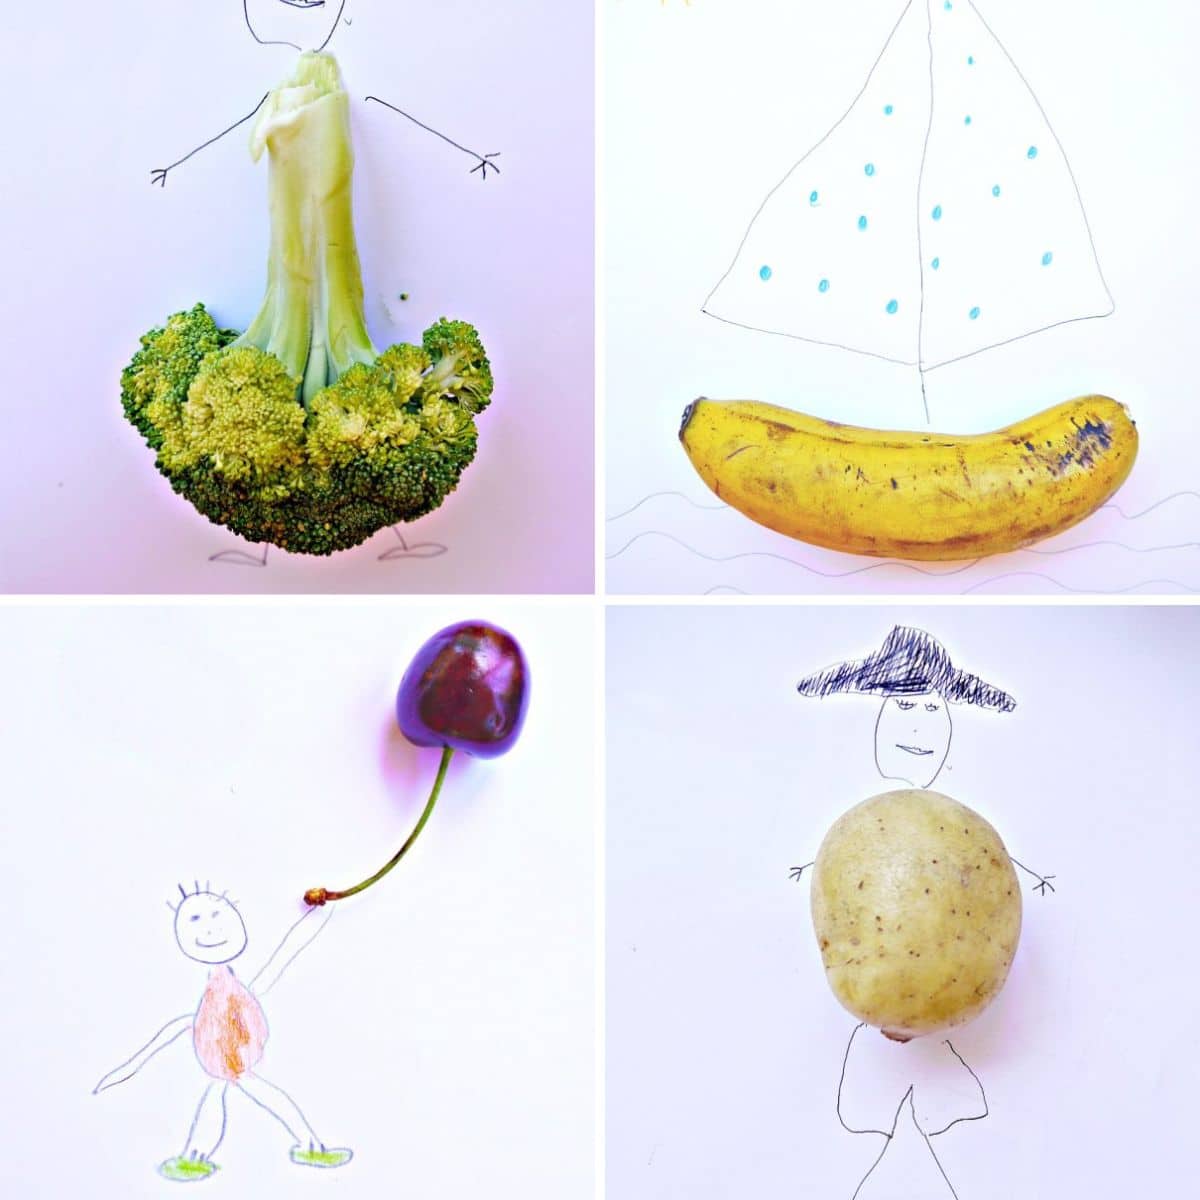 4 images of vegetable drawings.